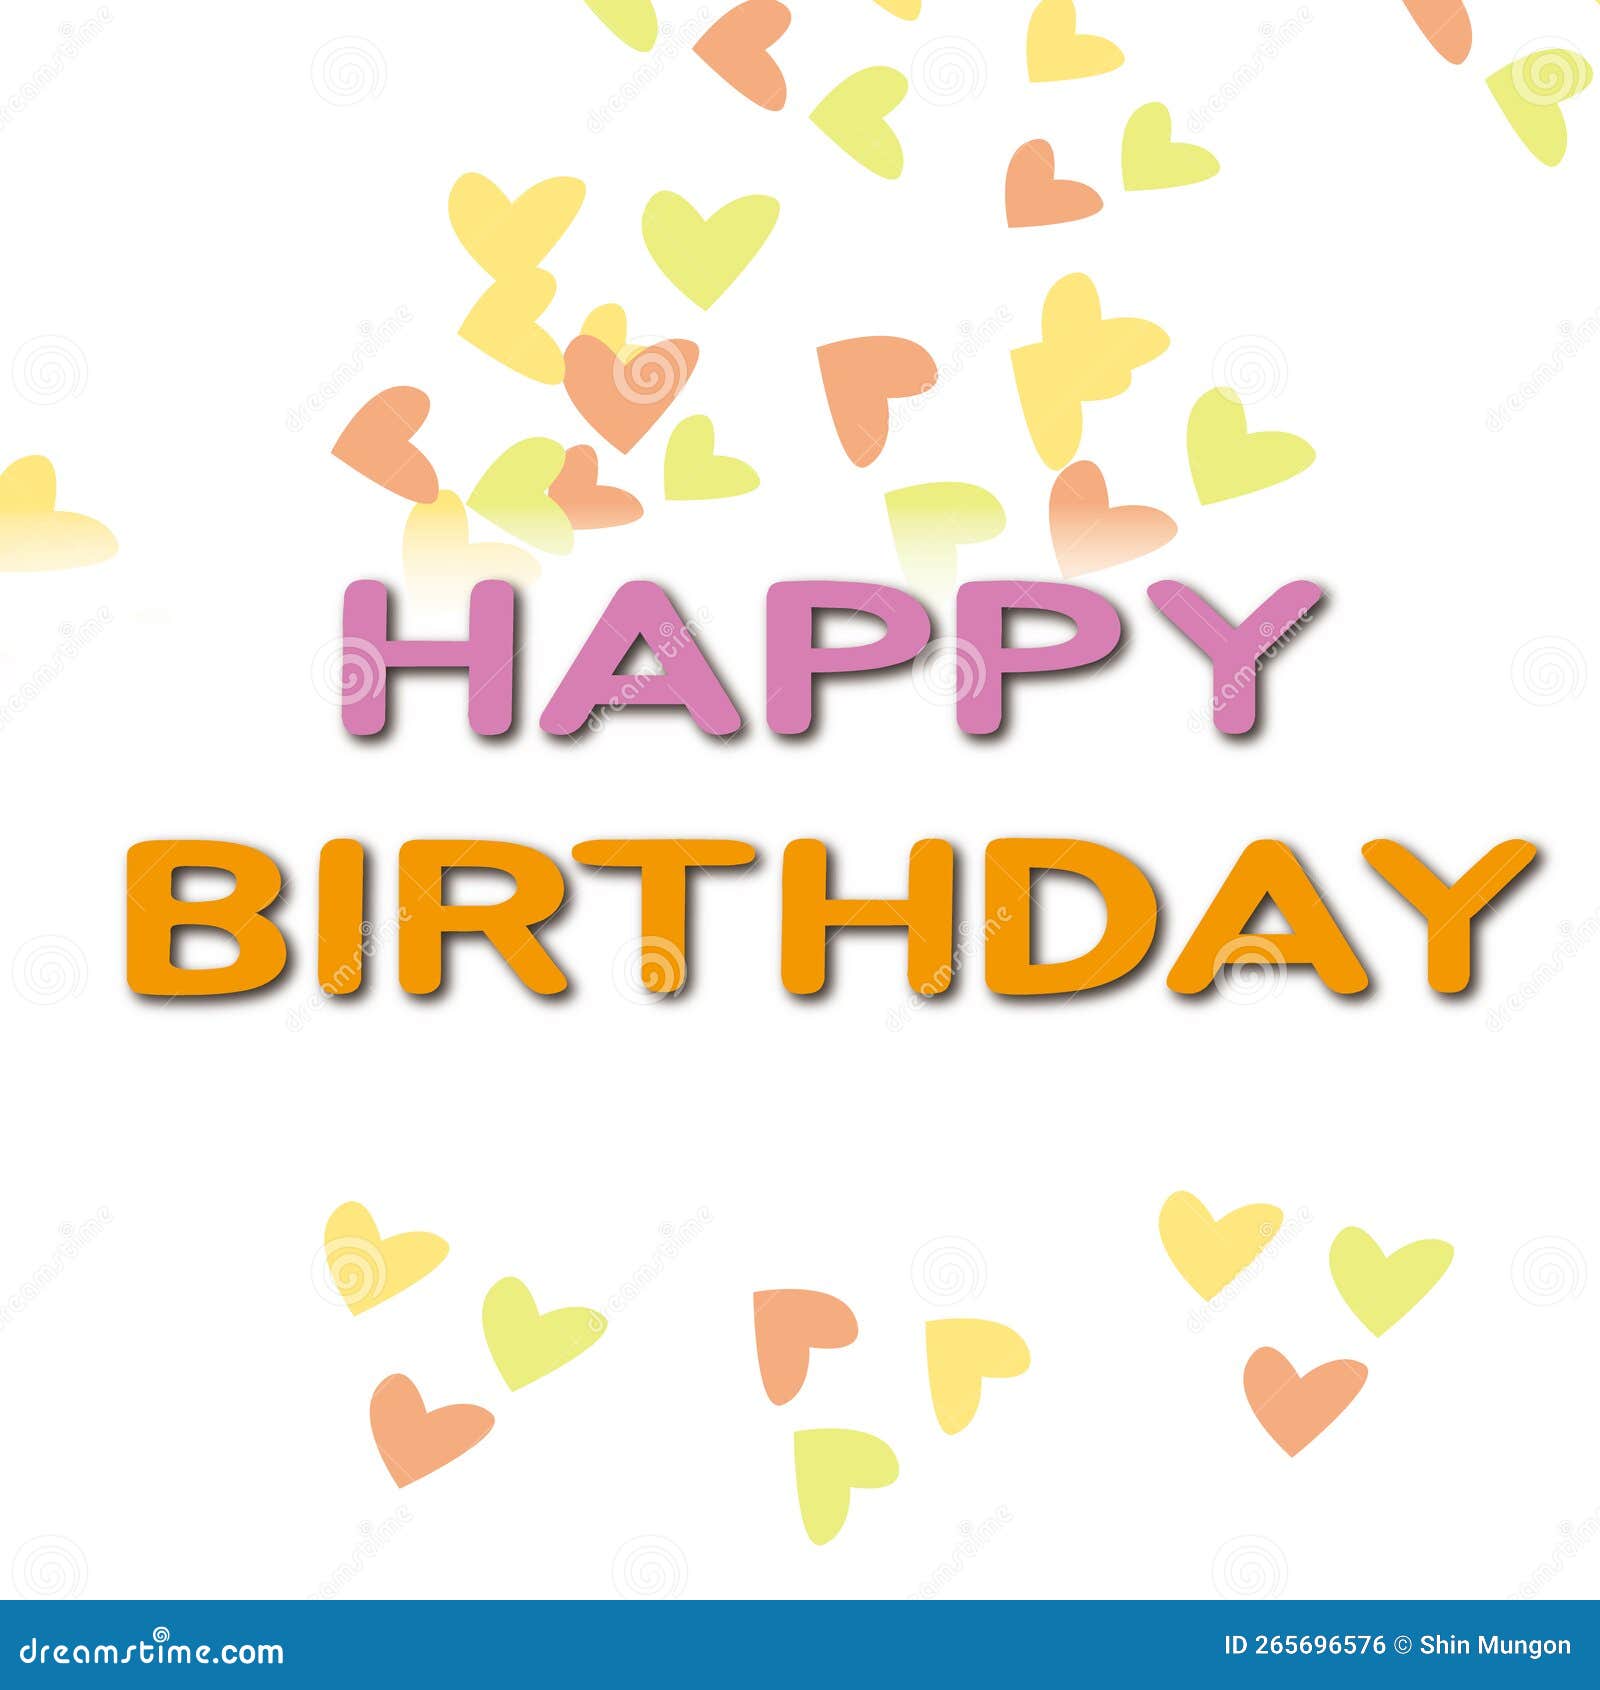 Happy Birthday Message with Various Borders Stock Illustration ...